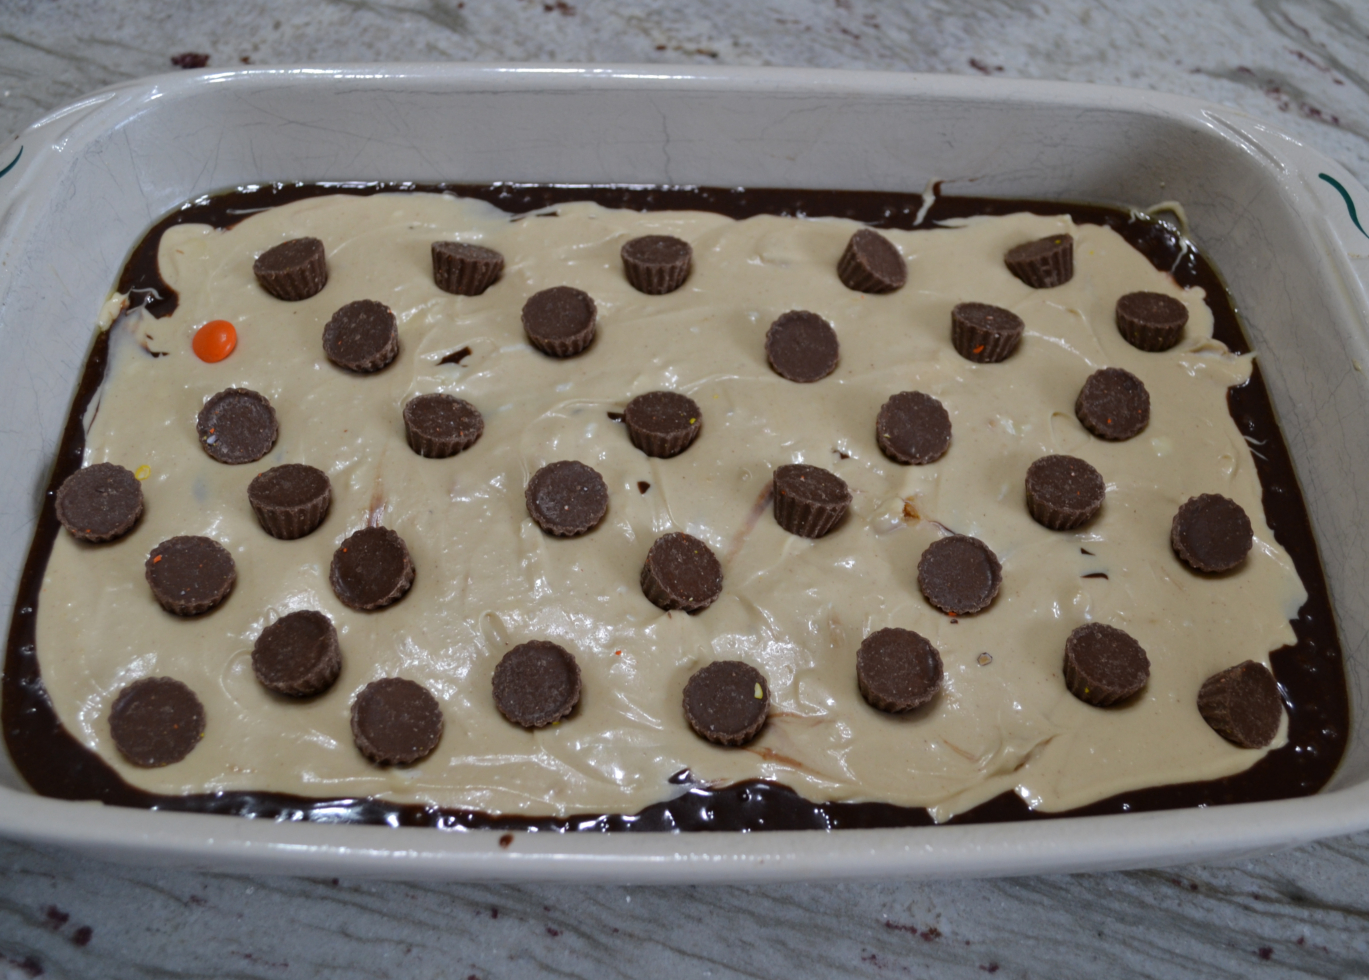 Extreme Peanut Butter Cream Cheese Brownies are extreme because they are a decadent brownie dessert, loaded with a peanut butter cream cheese layer, and then topped with a bag of Reese’s Baking Cups and Reese’s Pieces Candies